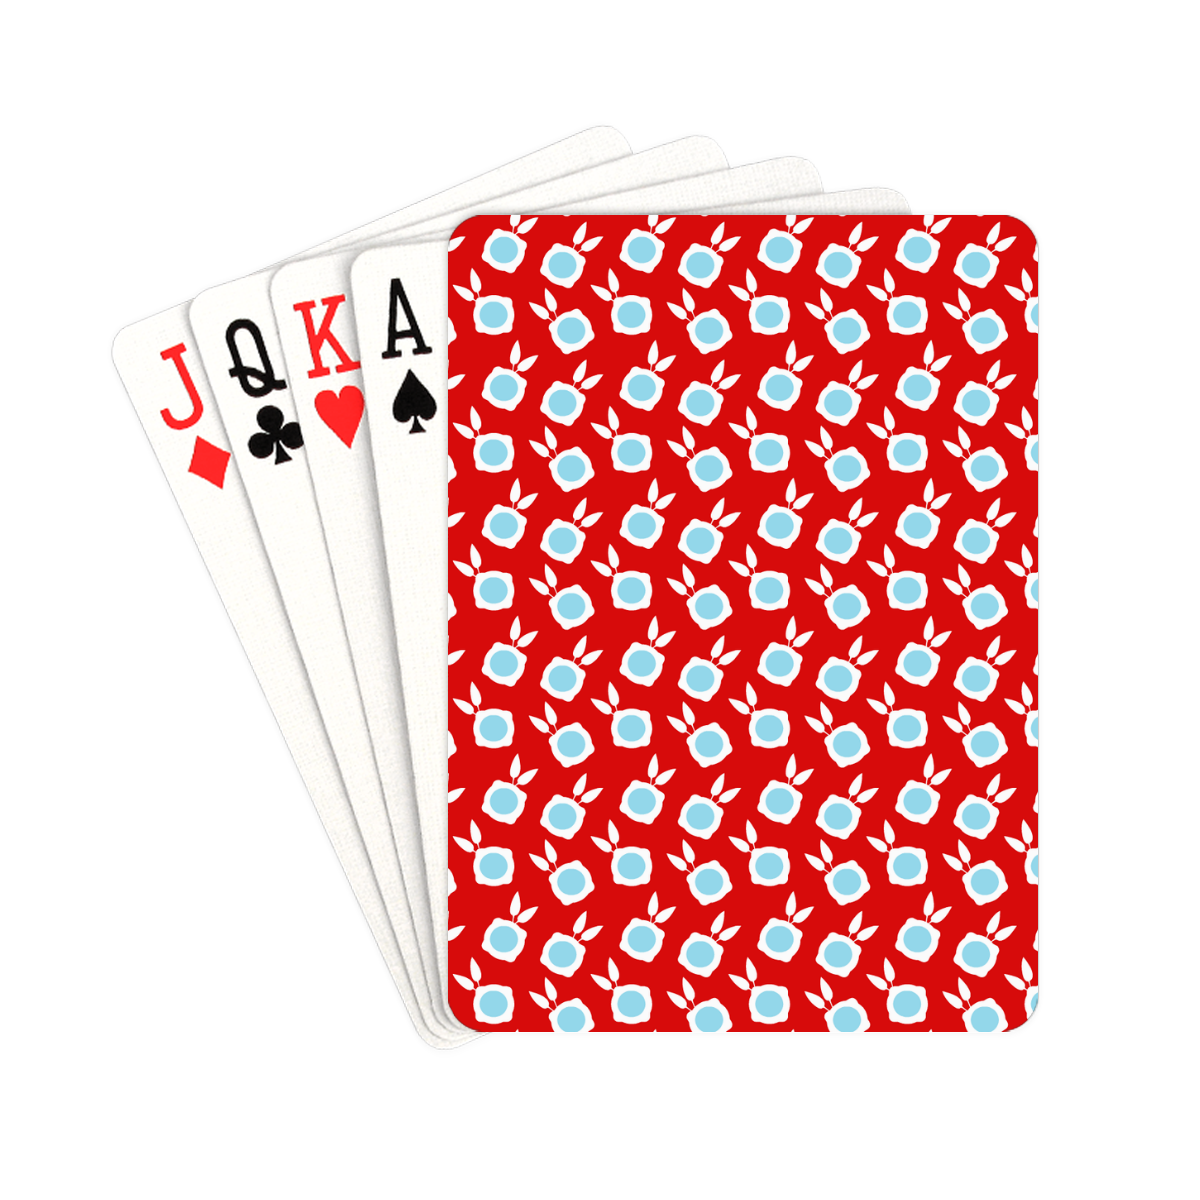 square flowers red Playing Cards 2.5"x3.5"